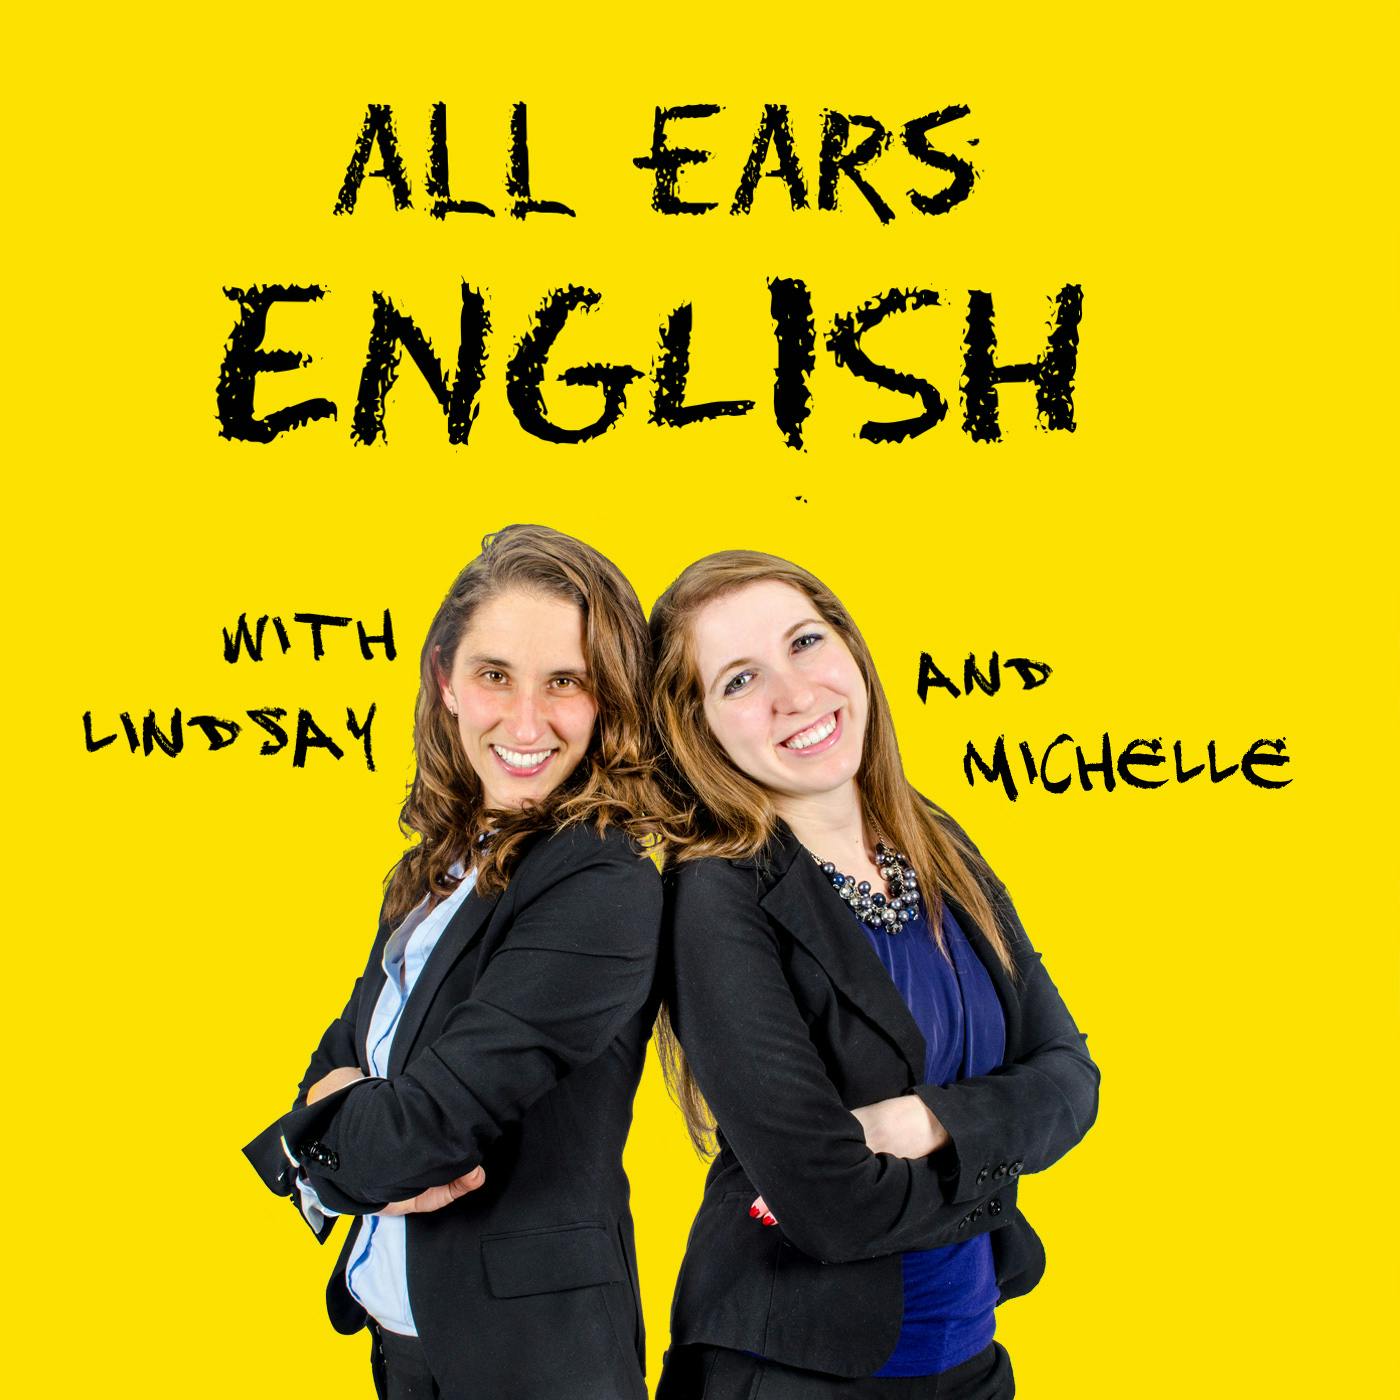 AEE 1412: What Unique Movie Phrase Can Make Someone Feel Exclusive? Find Out Today